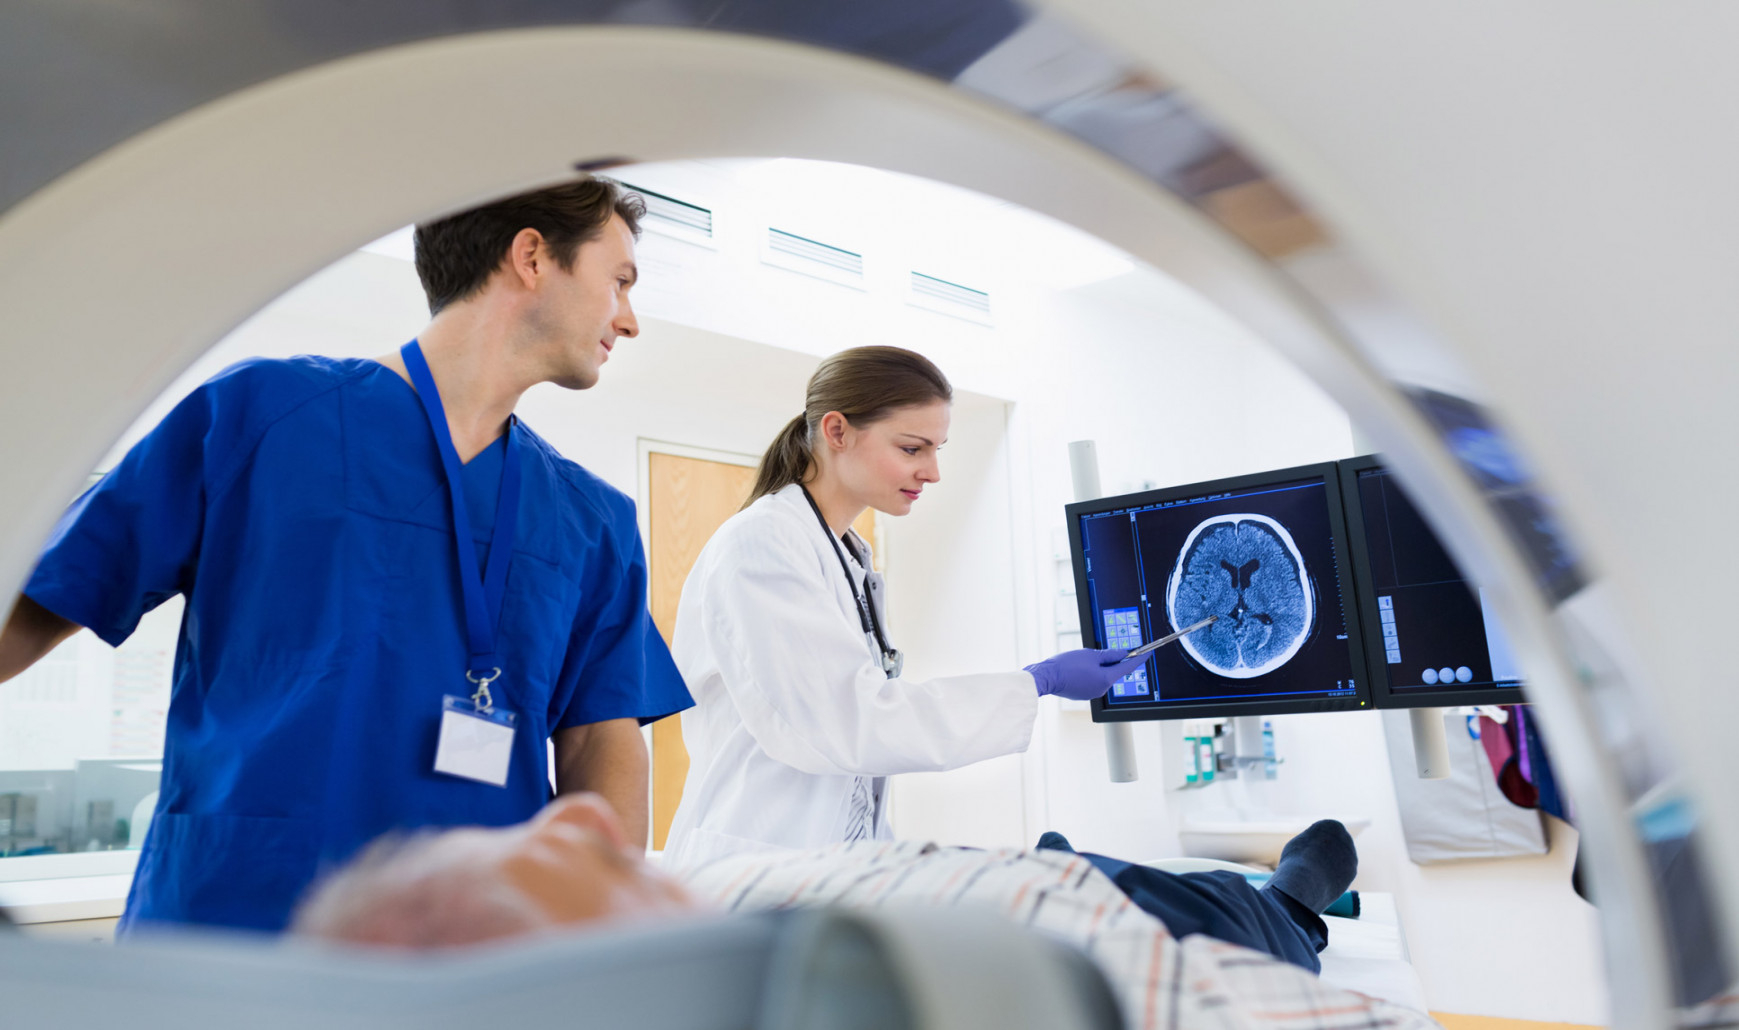 Student Radiology Tech Jobs - Entry-Level Radiology Tech Jobs For Students